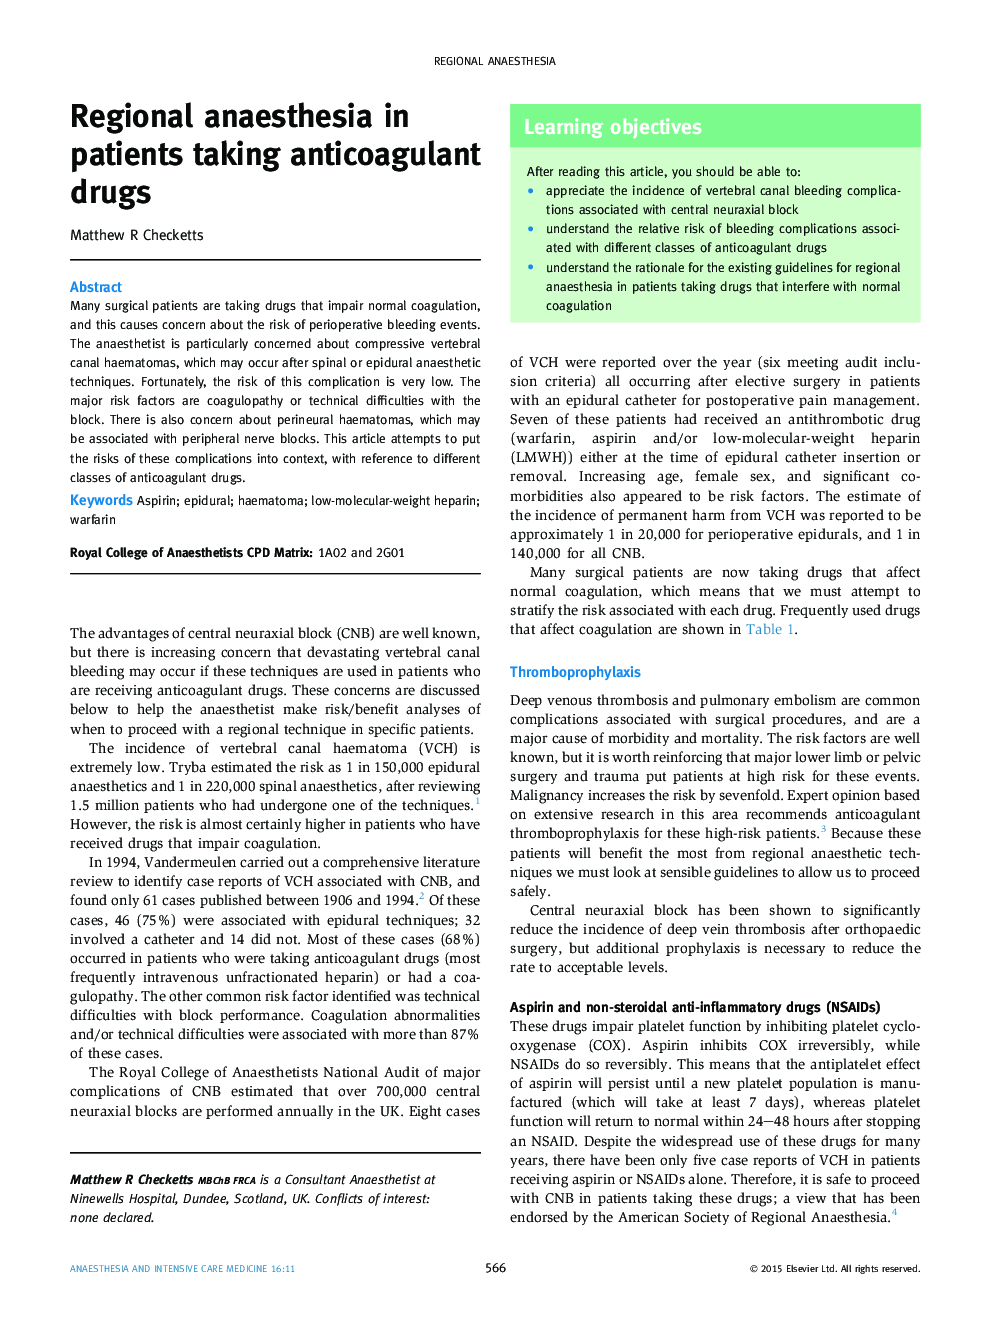 Regional anaesthesia in patients taking anticoagulant drugs